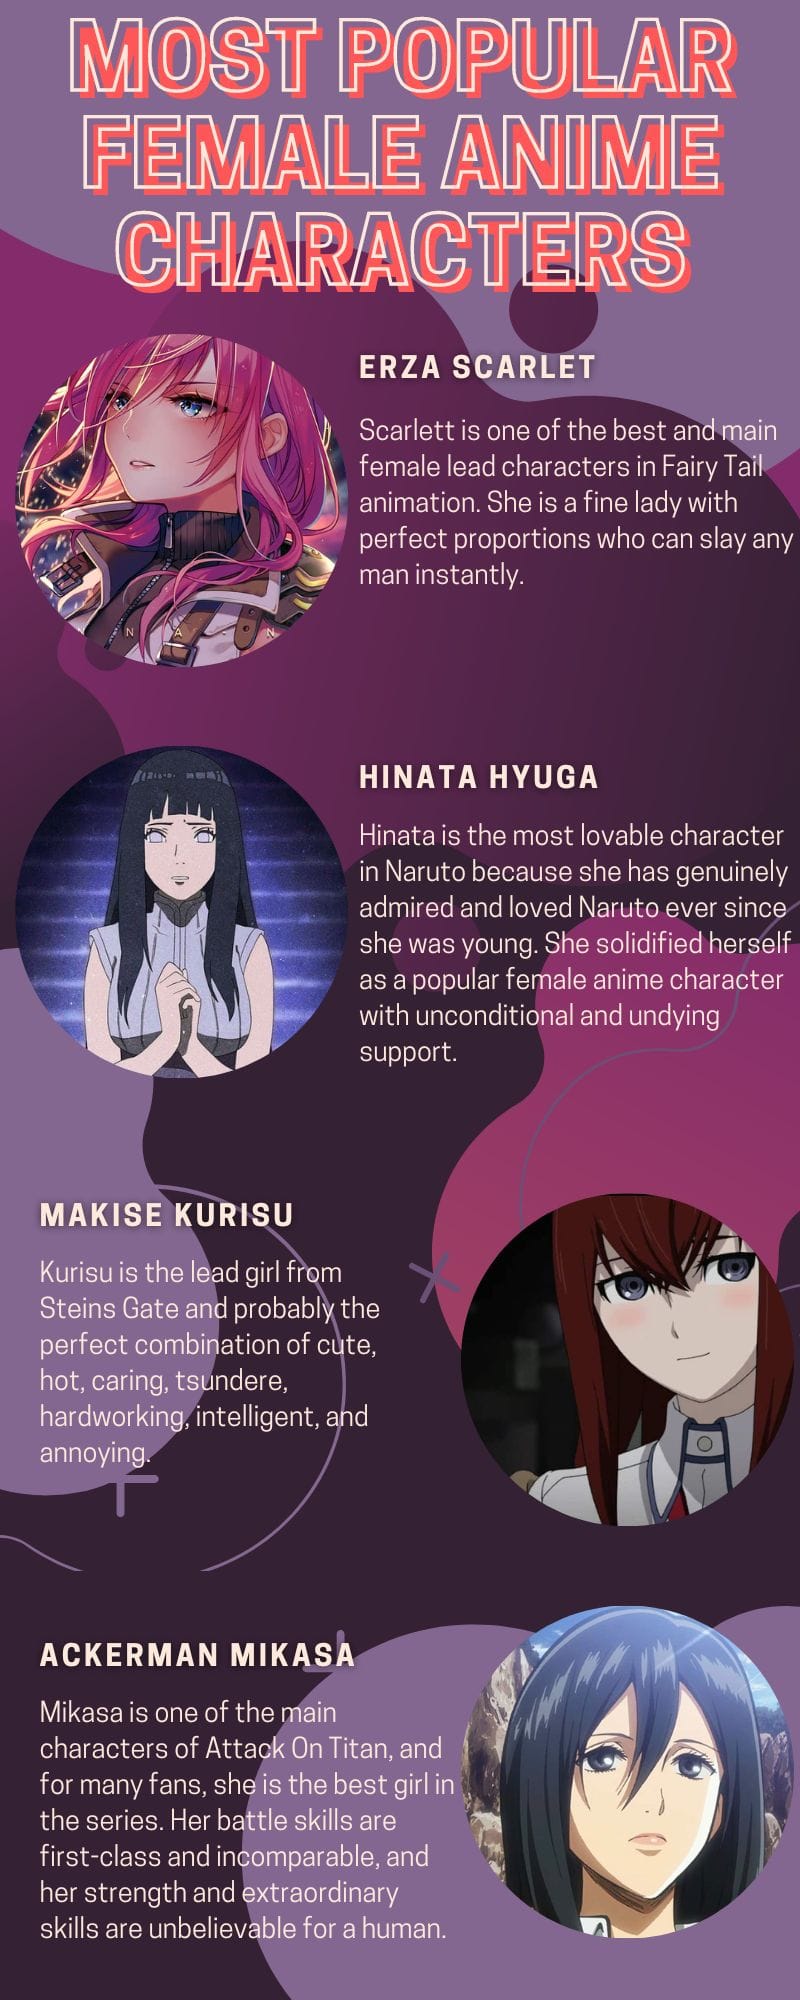 12 Favorite Iconic Female Anime Characters, Often Chosen for Cosplay-demhanvico.com.vn